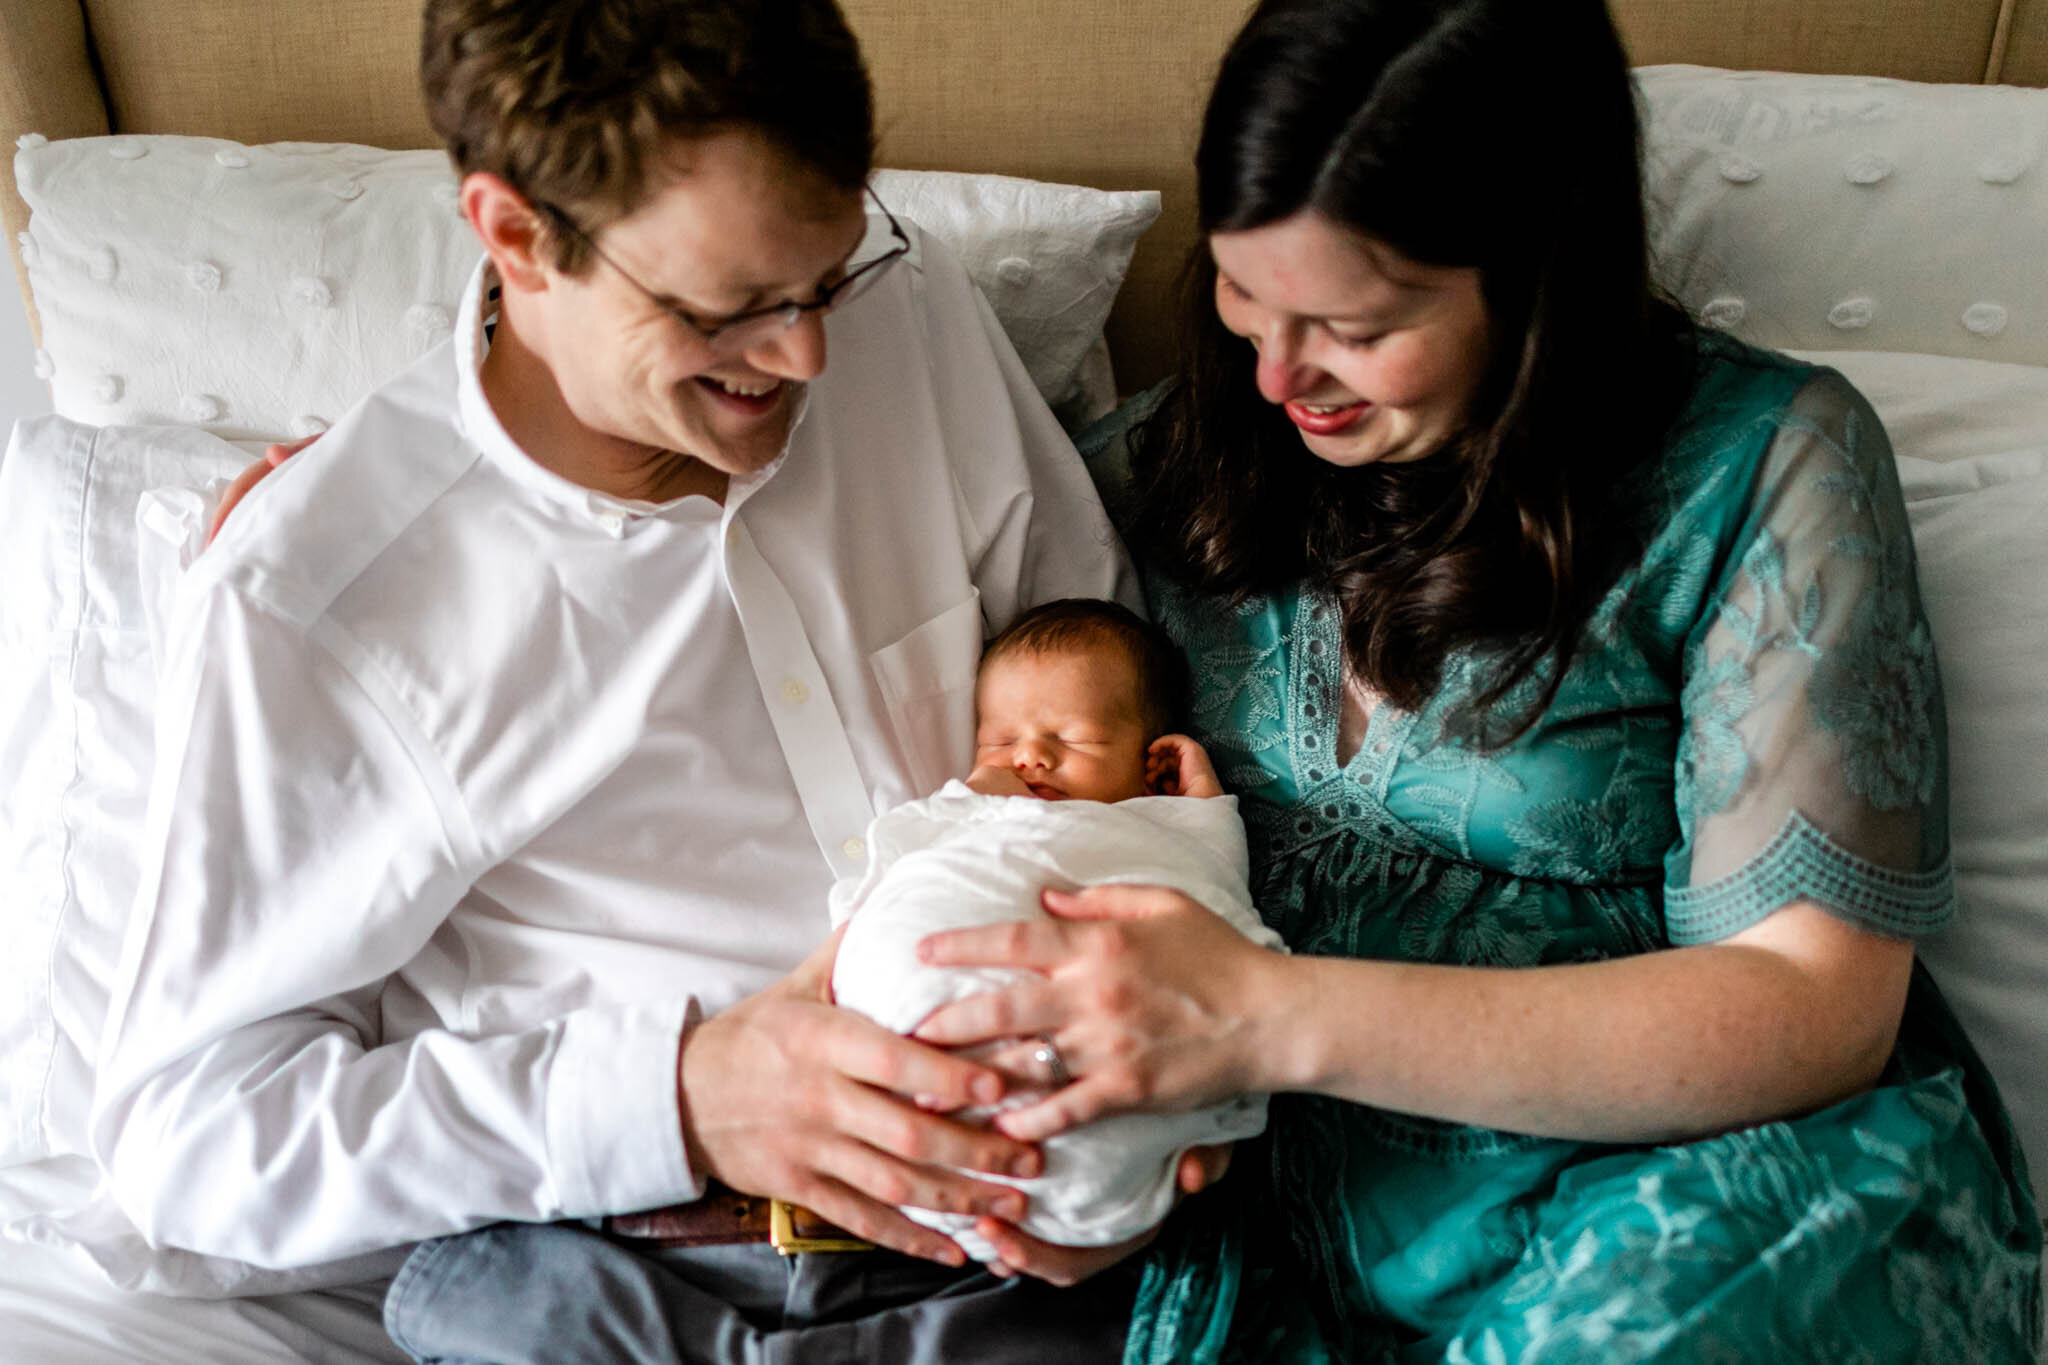 Durham Newborn Photographer | By G. Lin Photography | Man and woman looking down and holding baby